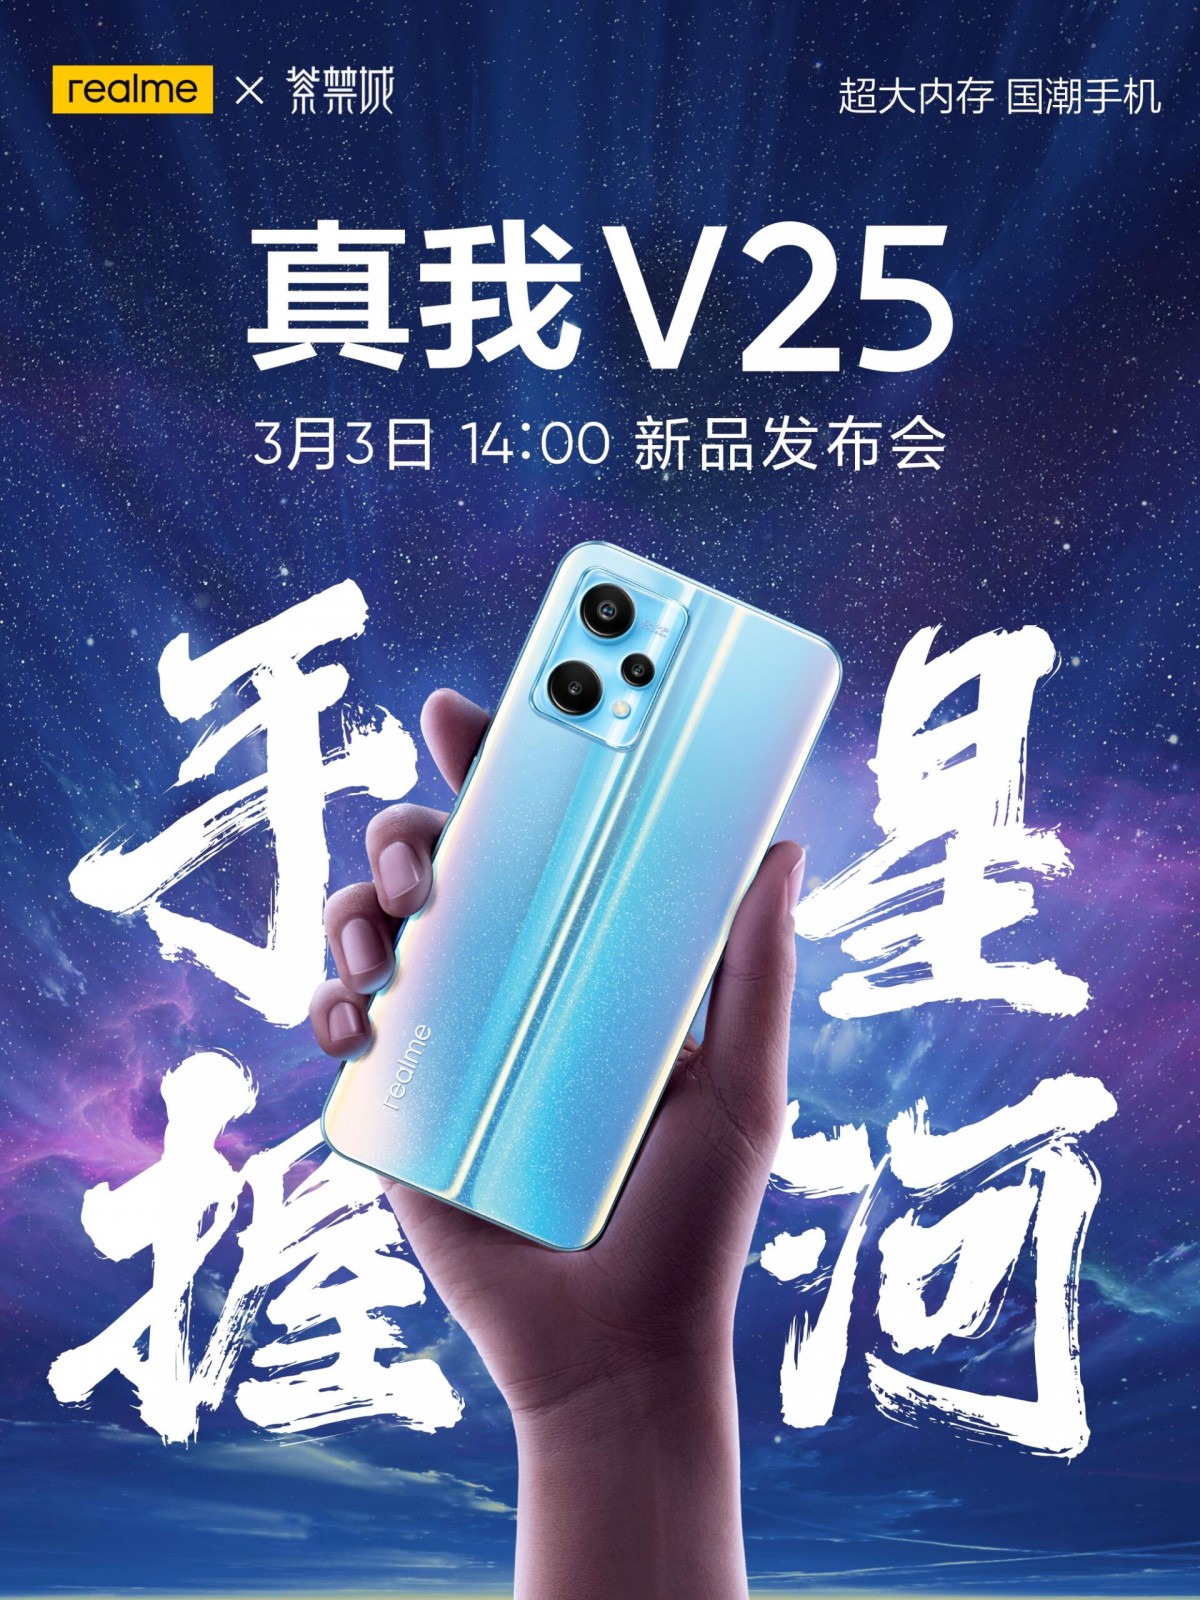 Realme V25 officially confirmed to launch on March 3